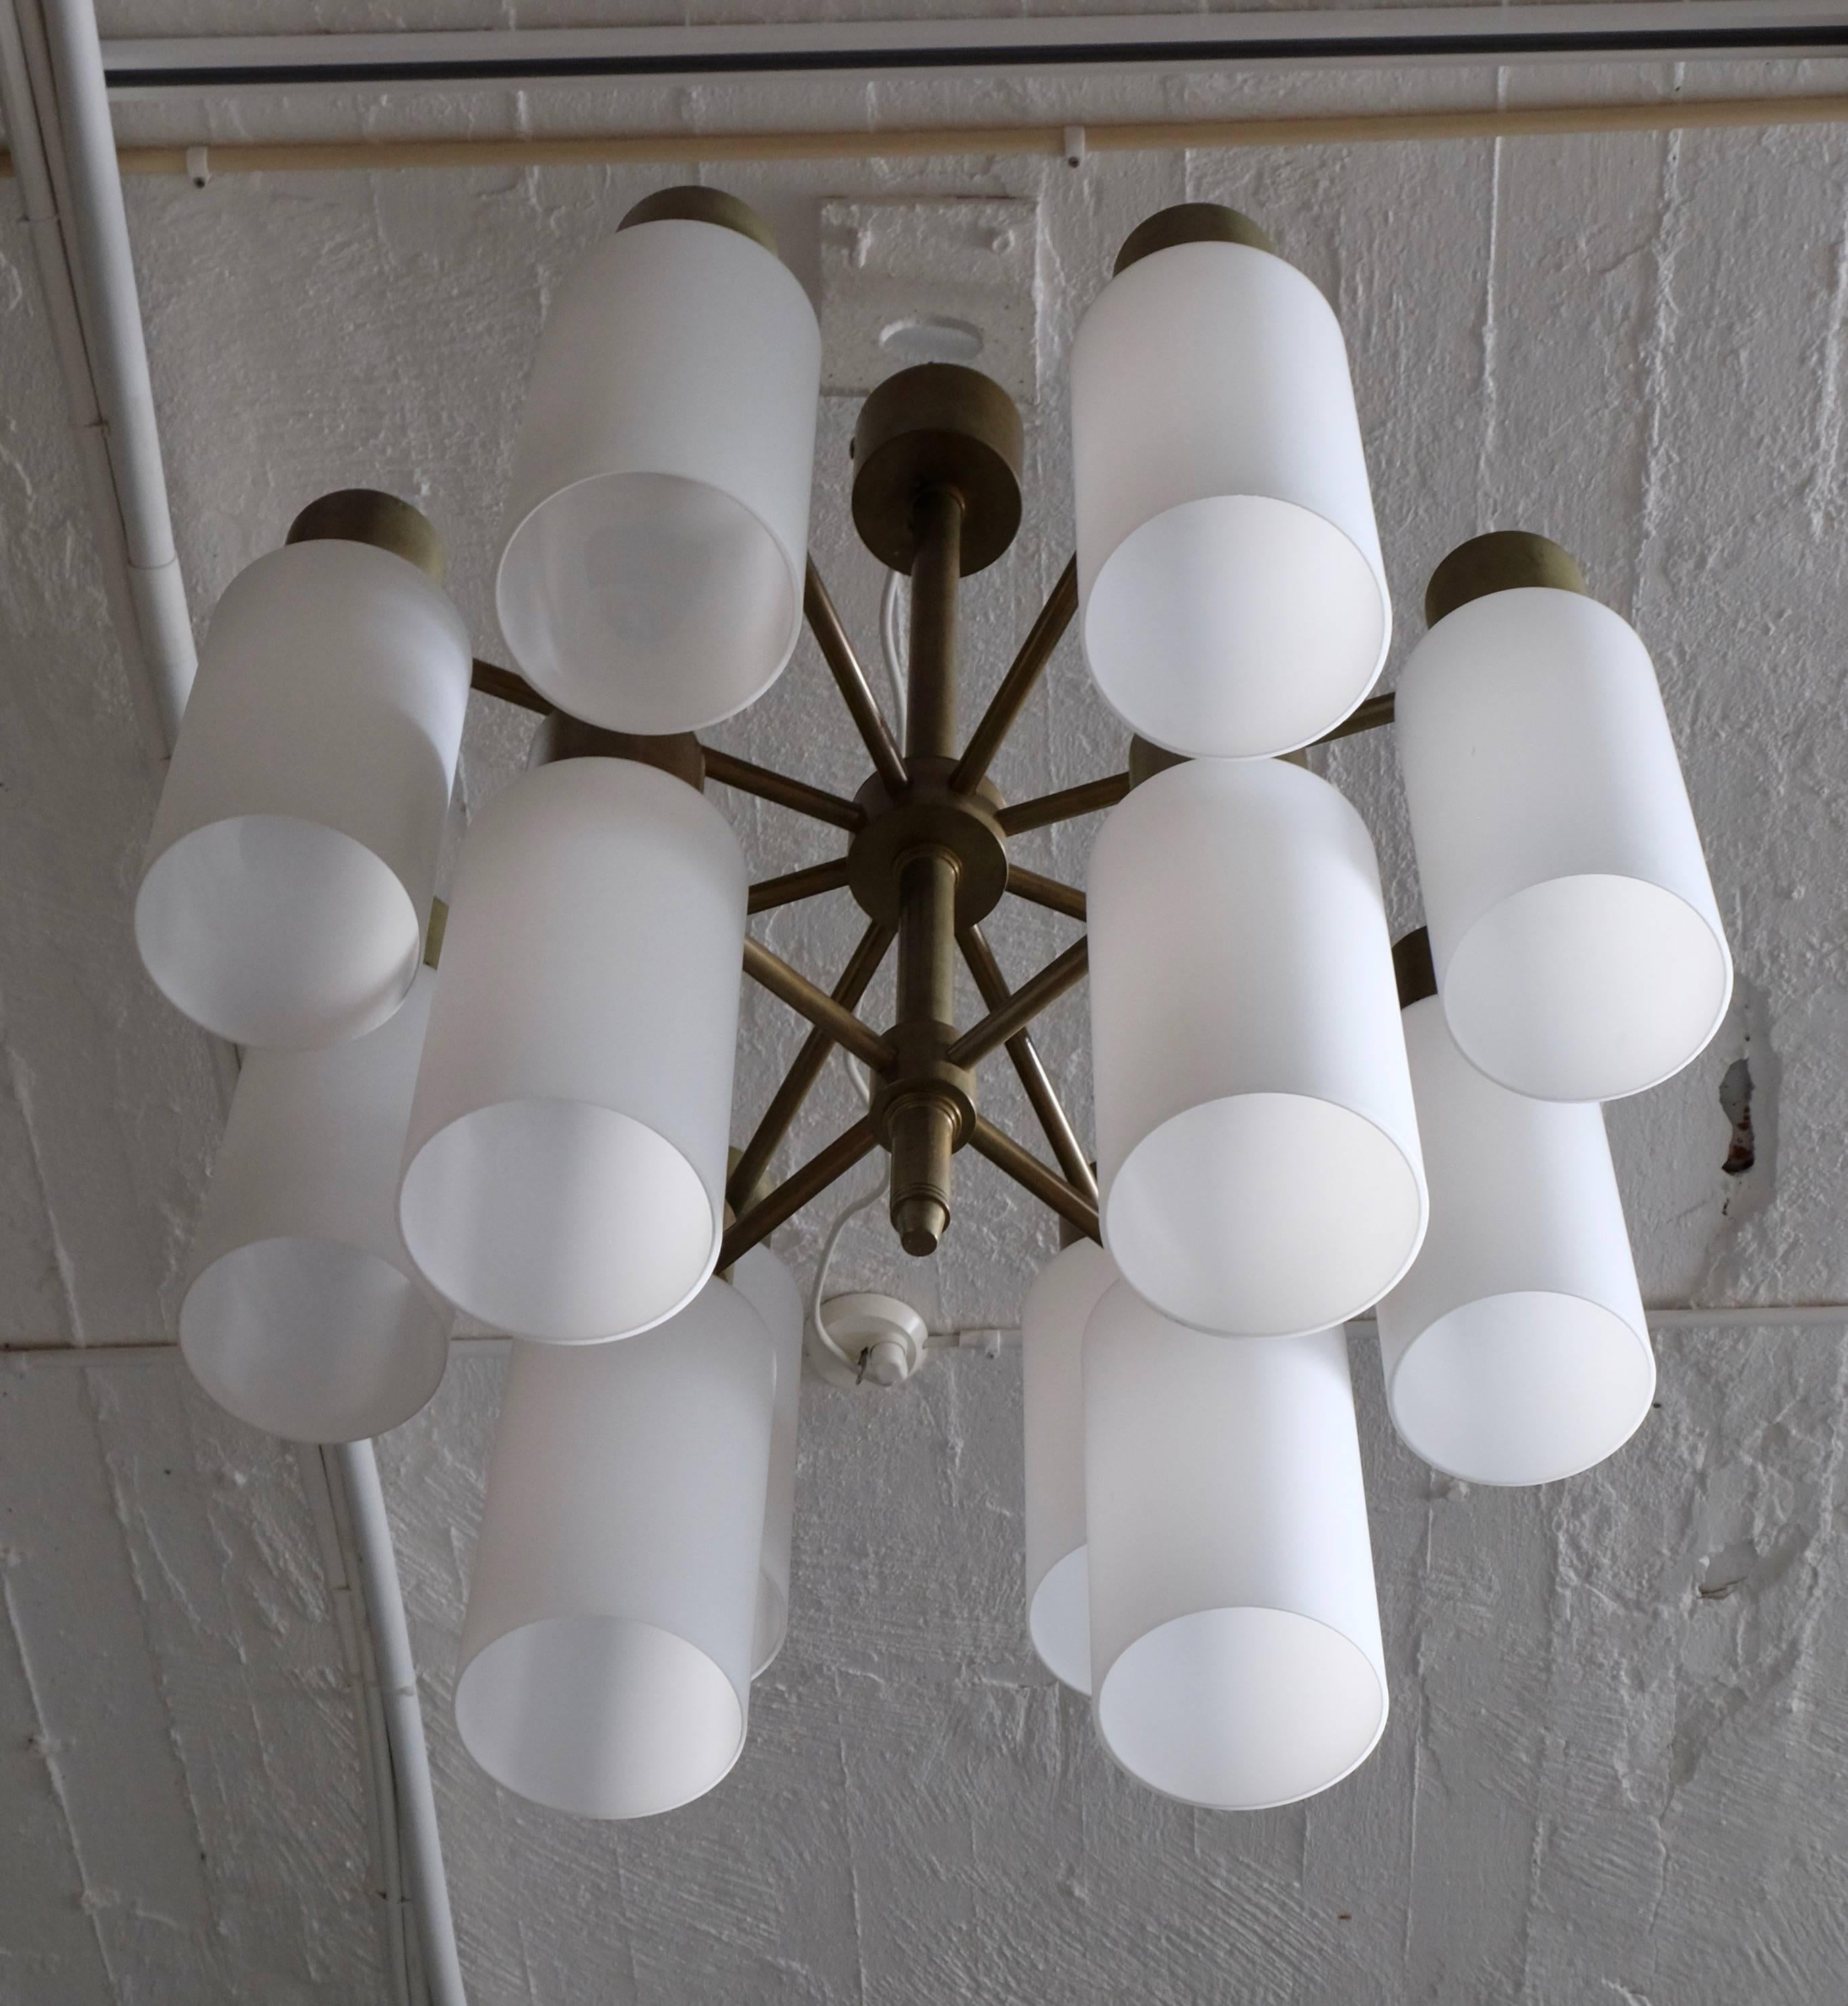 Rare Pair of Hans-Agne Jakobsson Brass Chandeliers with Opaline Shades, 1960s For Sale 2